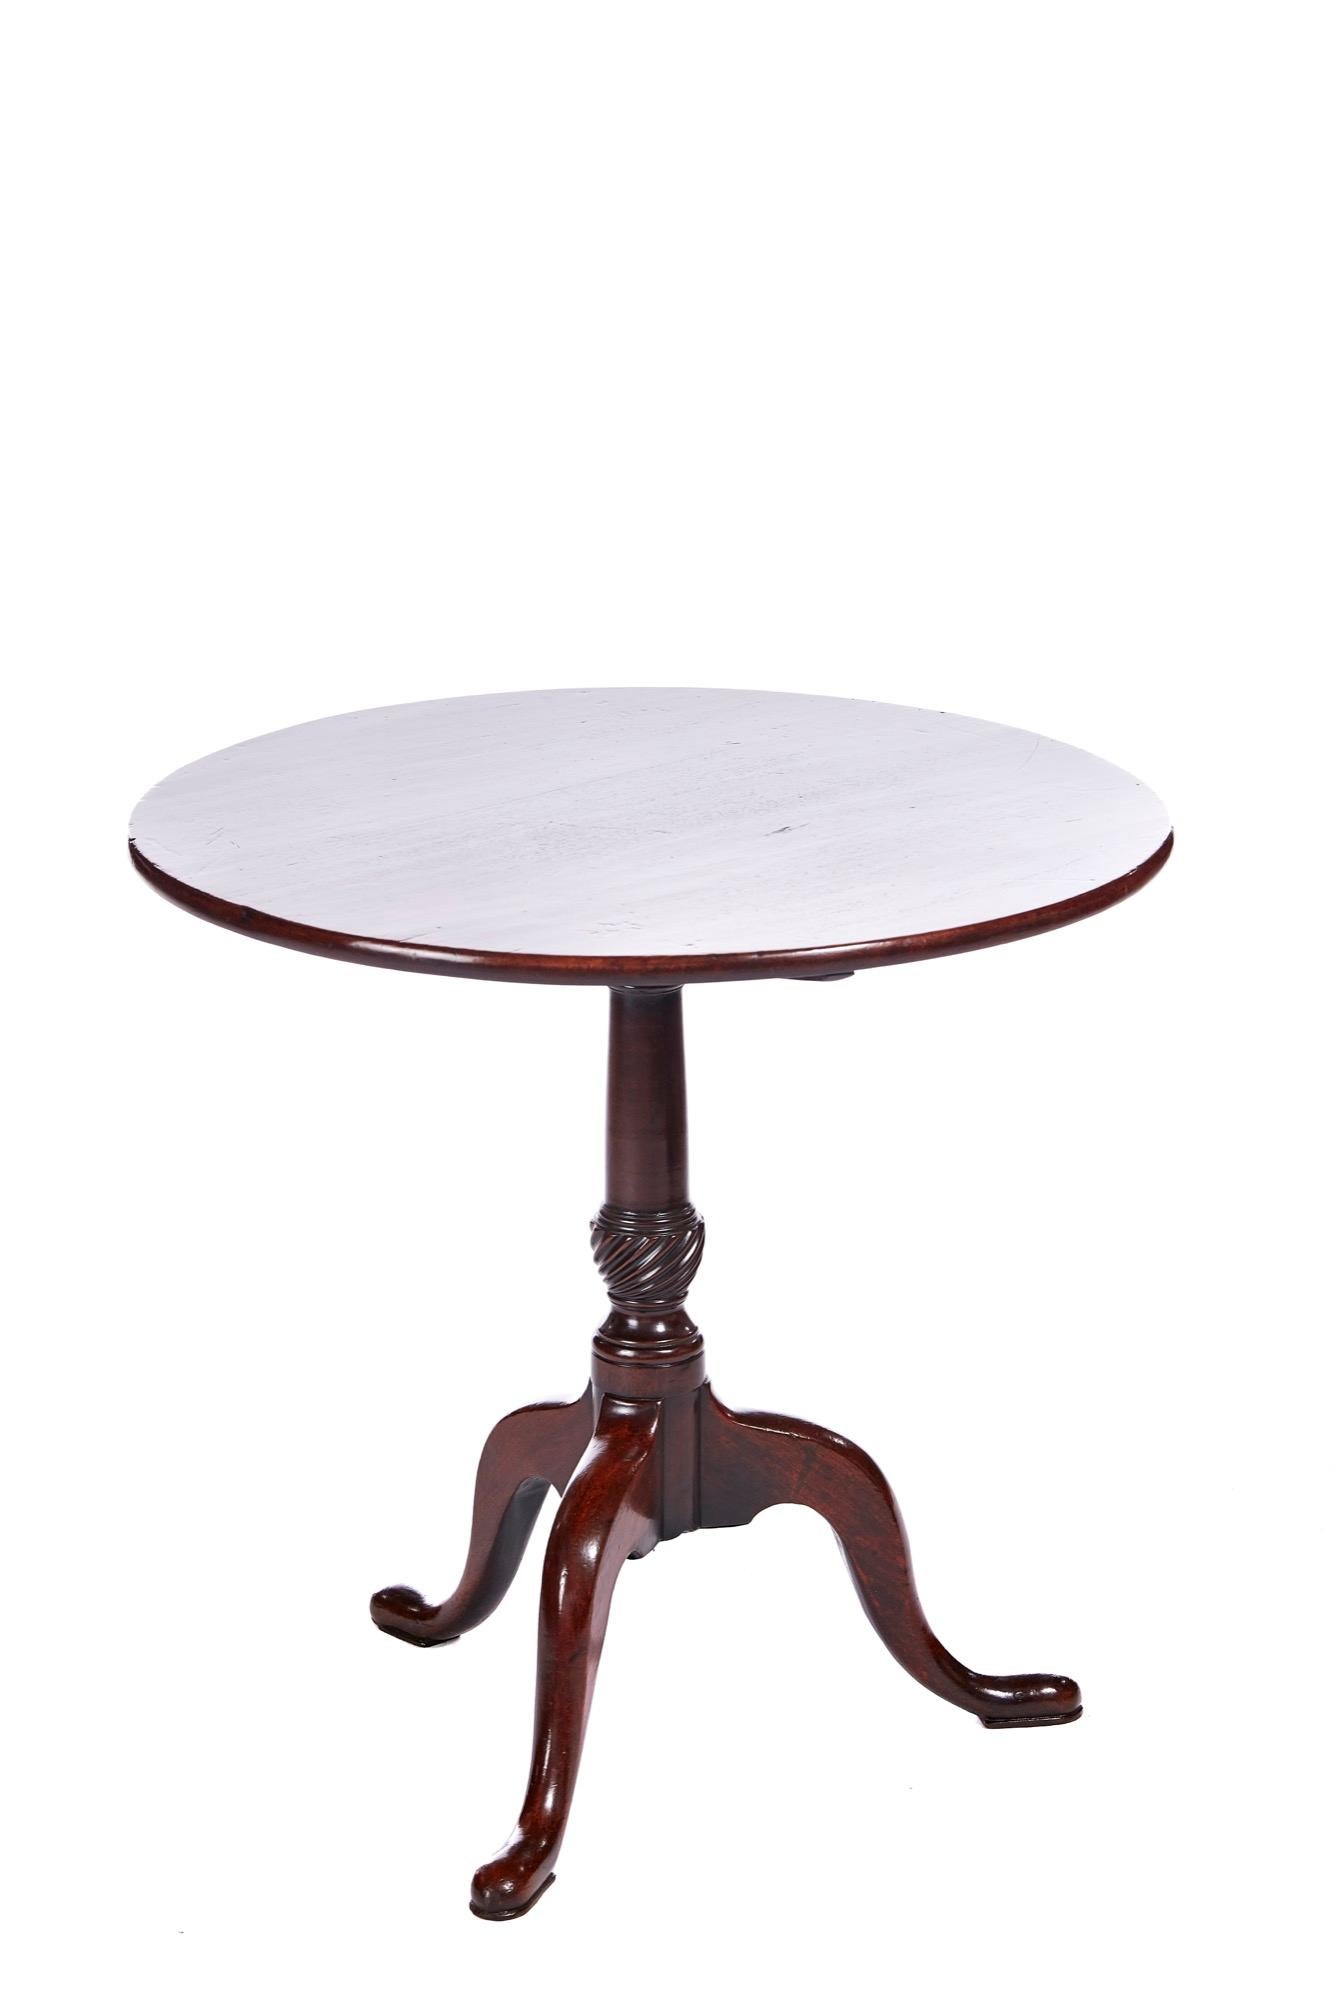 Quality 18th century Georgian antique mahogany tripod table having an attractive quality 1 piece mahogany top supported by a shaped turned twisted column raised on 3 shaped cabriole legs on pad feet.

In excellent overall condition. Imperfections